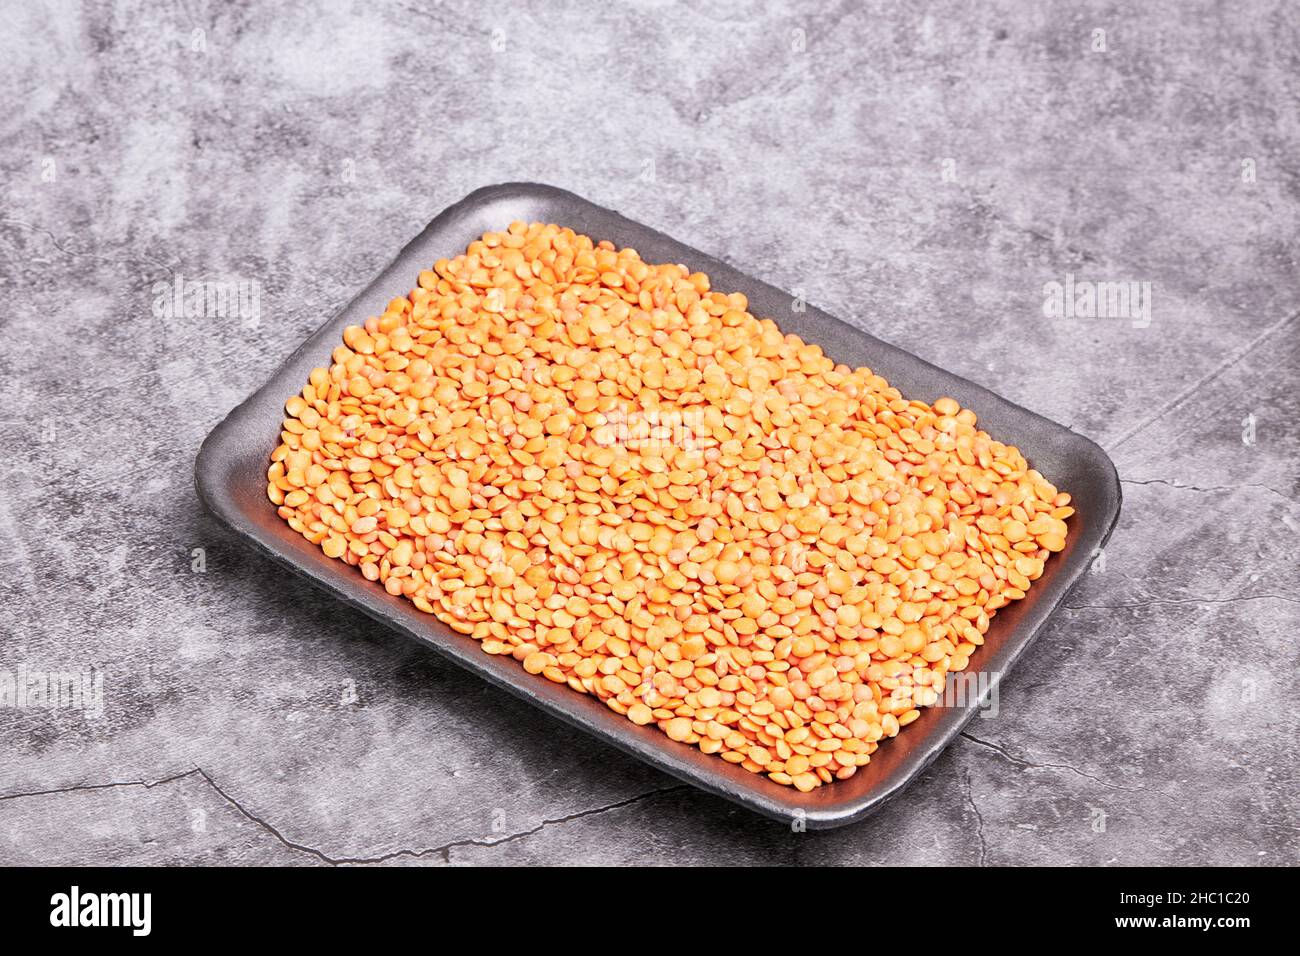 Black tray with raw orange lentils on a gray stone background. Healthy food concept Stock Photo